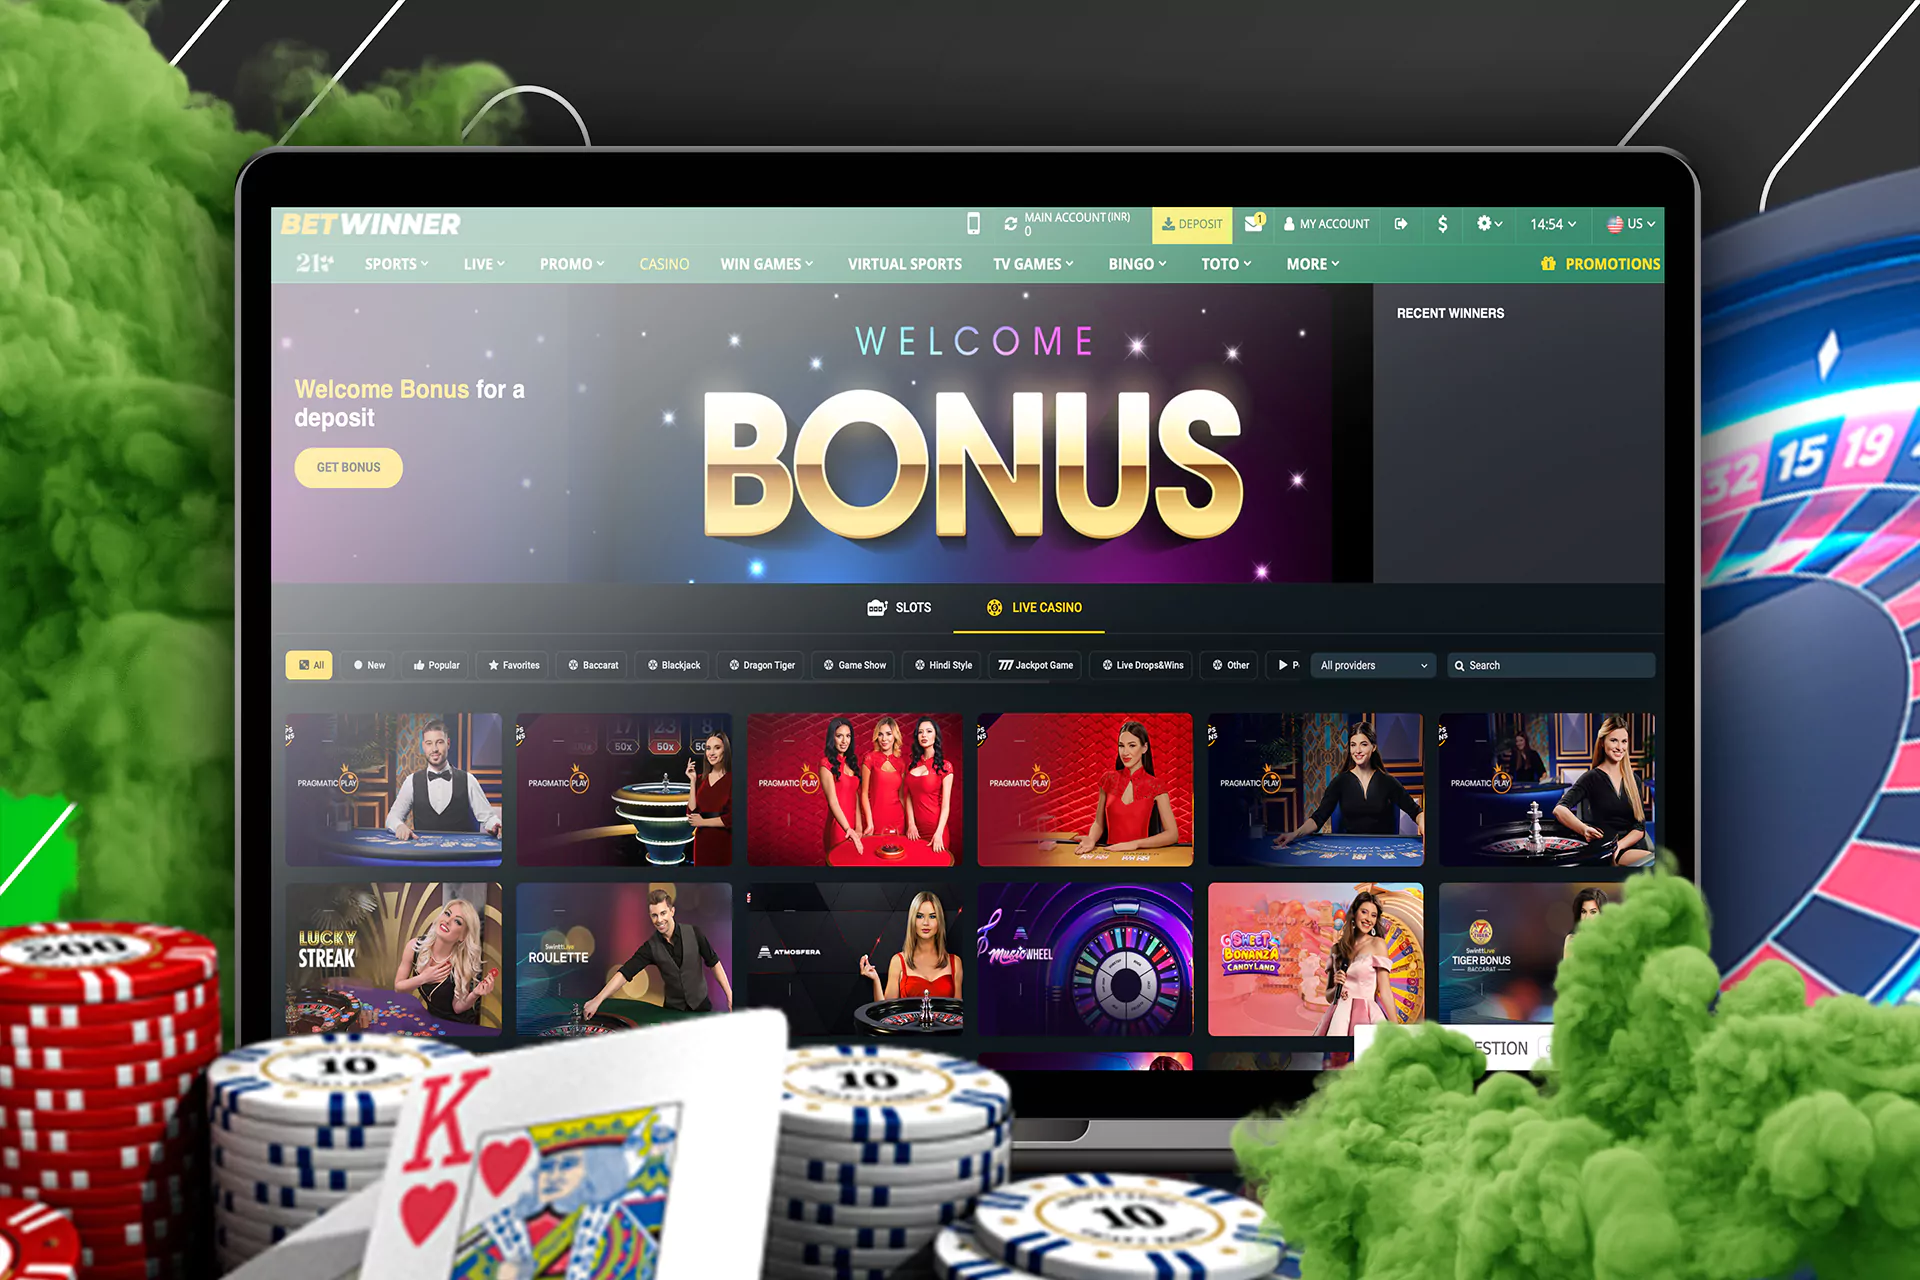 Play your favorite casino games at Betwinner.